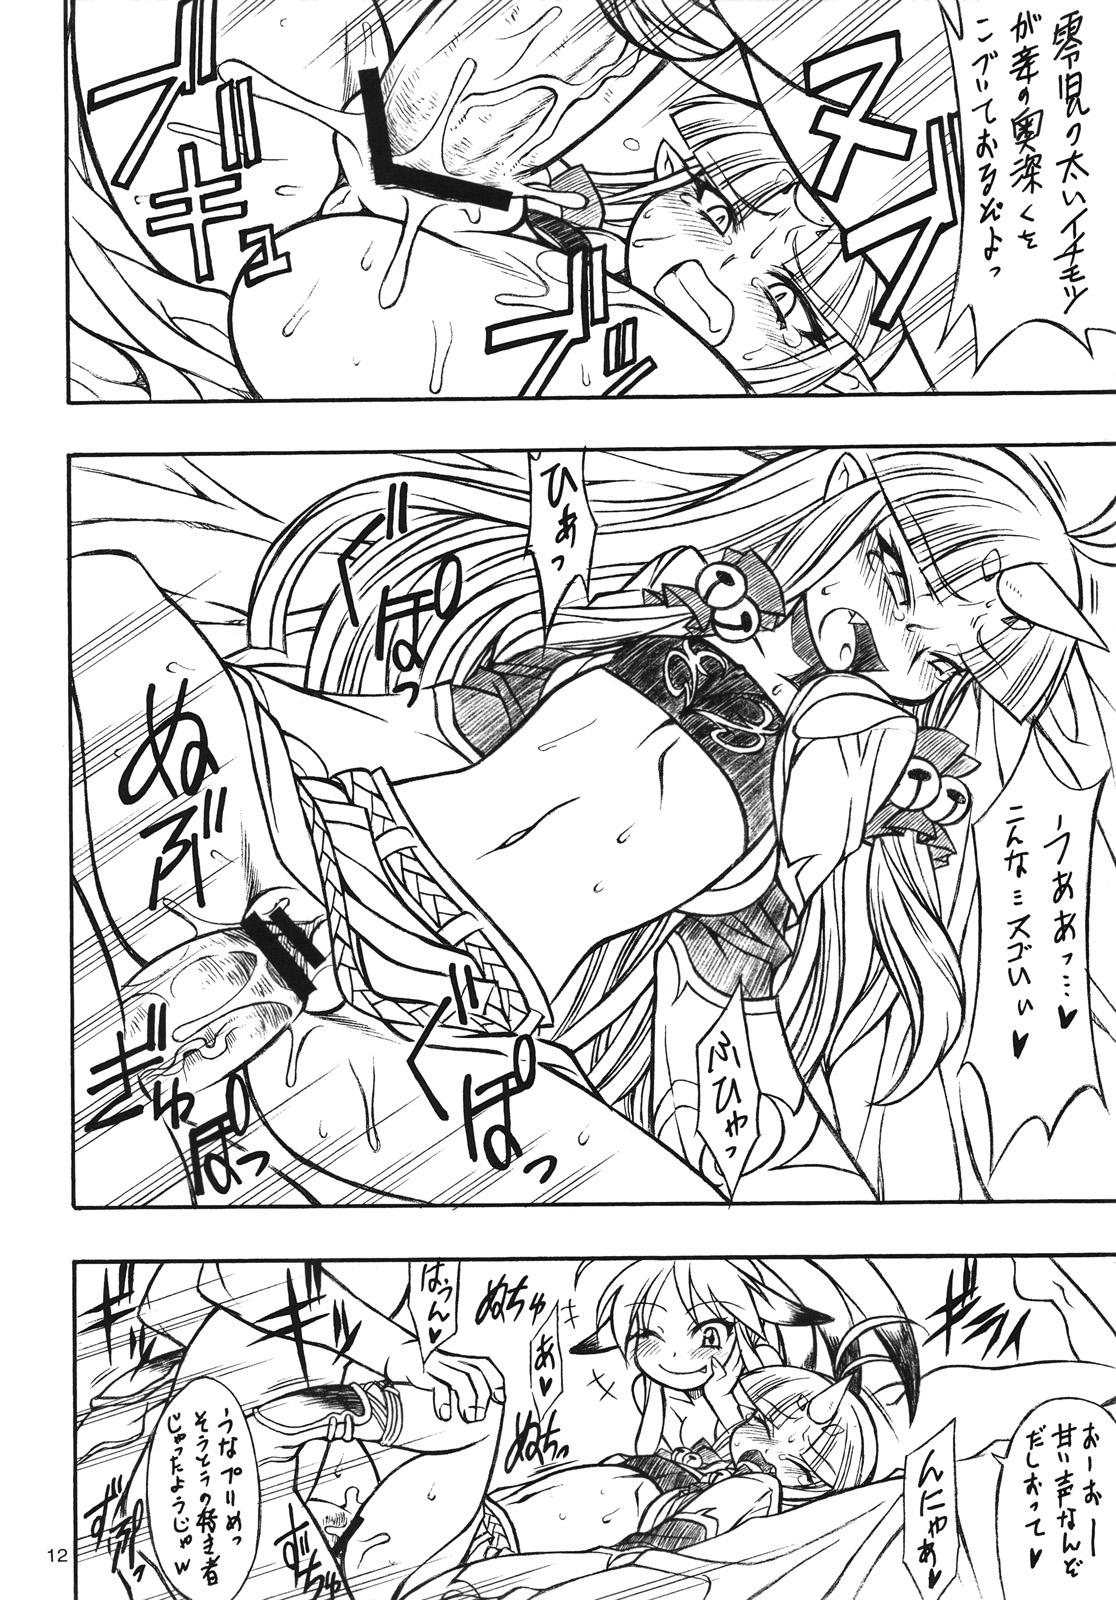 Cum On Face mugen otome - Super robot wars Endless frontier Sextoys - Page 11